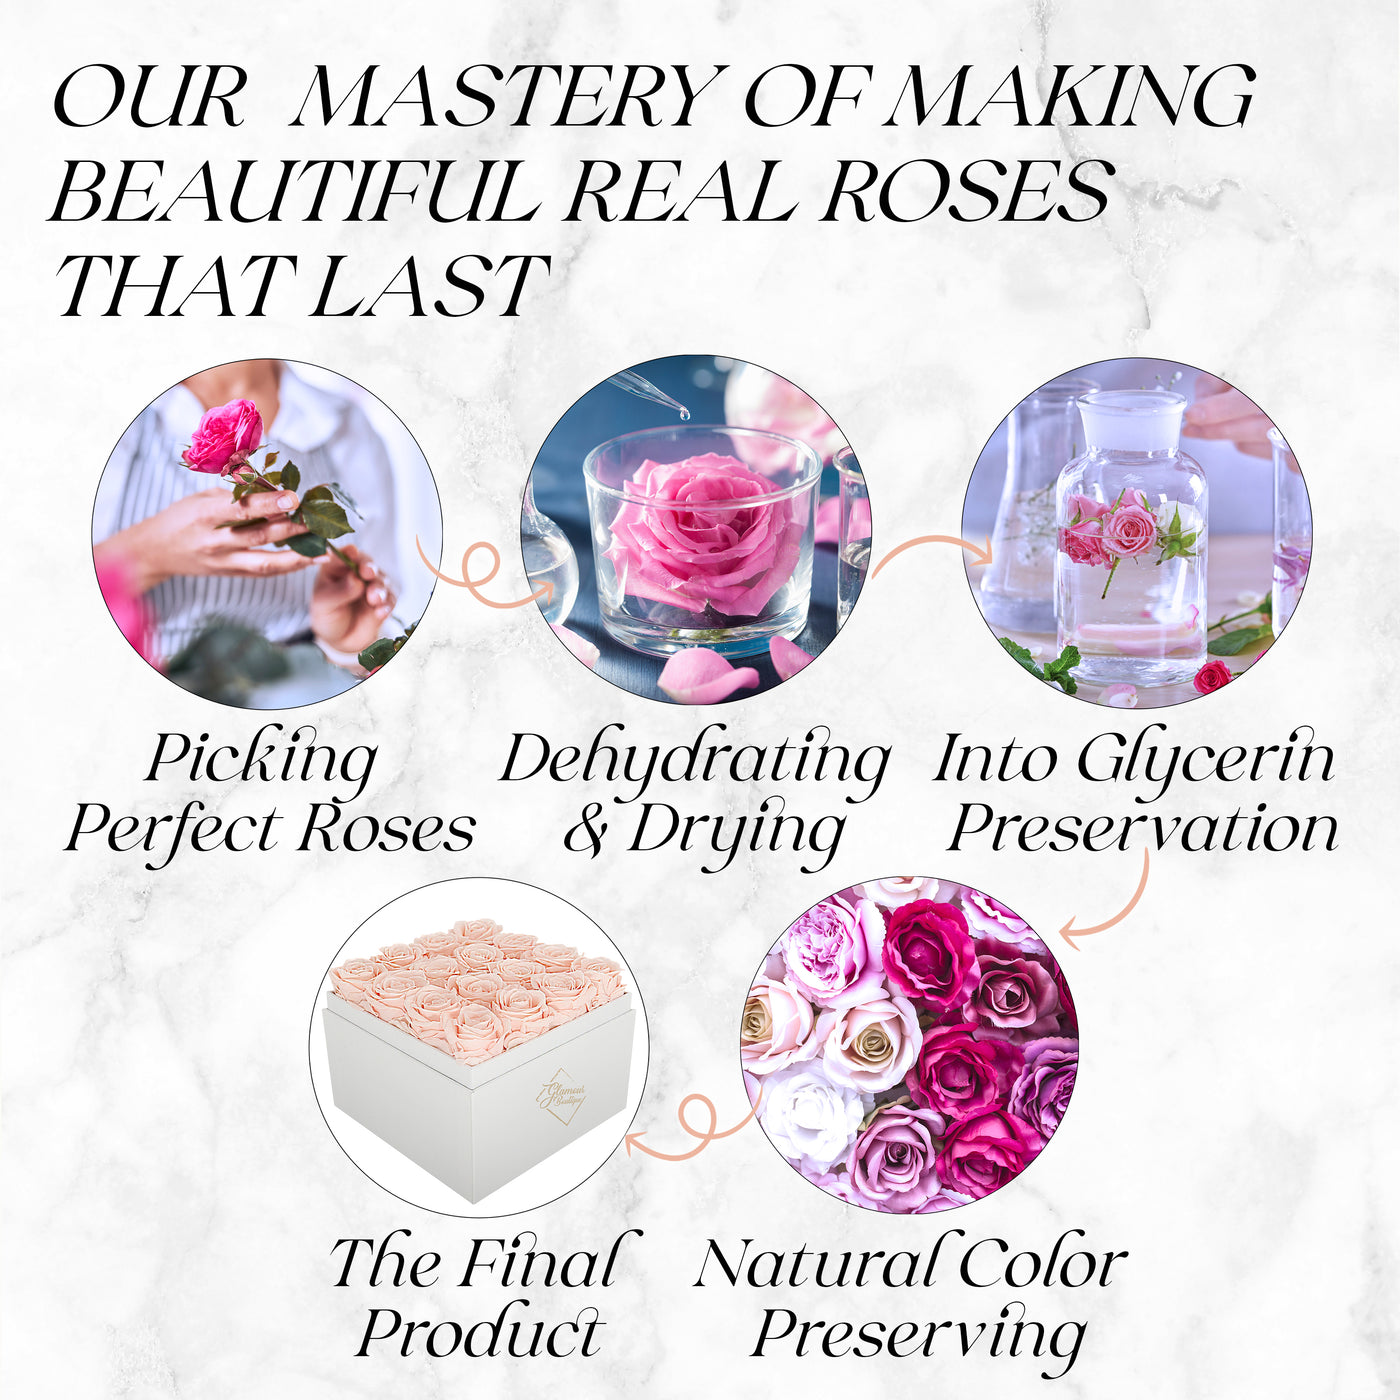 16 Preserved Roses Cased in White Box with Acrylic Cover - Peach